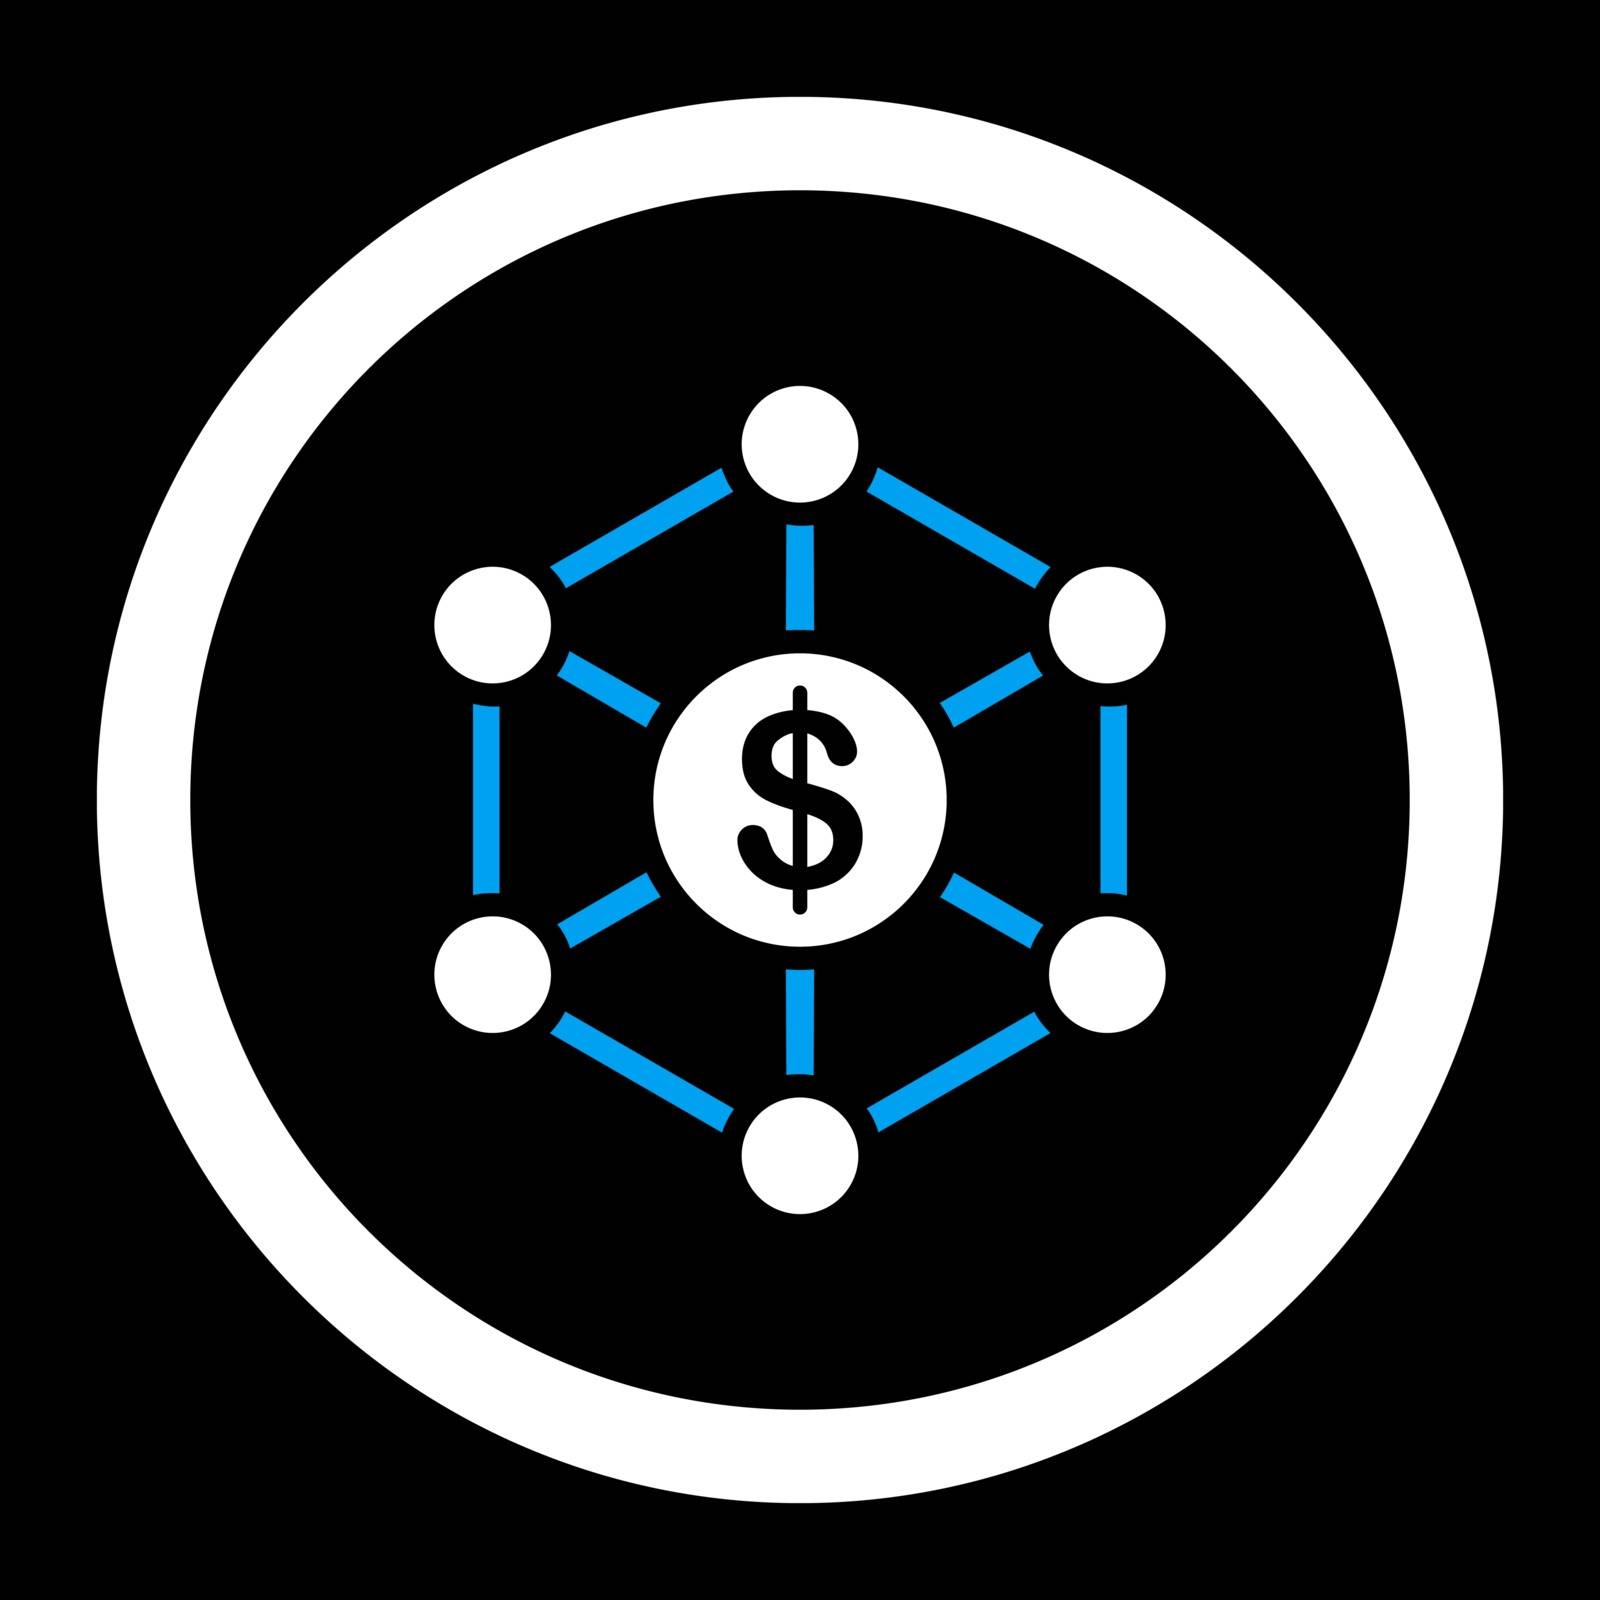 Scheme vector icon. This flat rounded symbol uses blue and white colors and isolated on a black background.